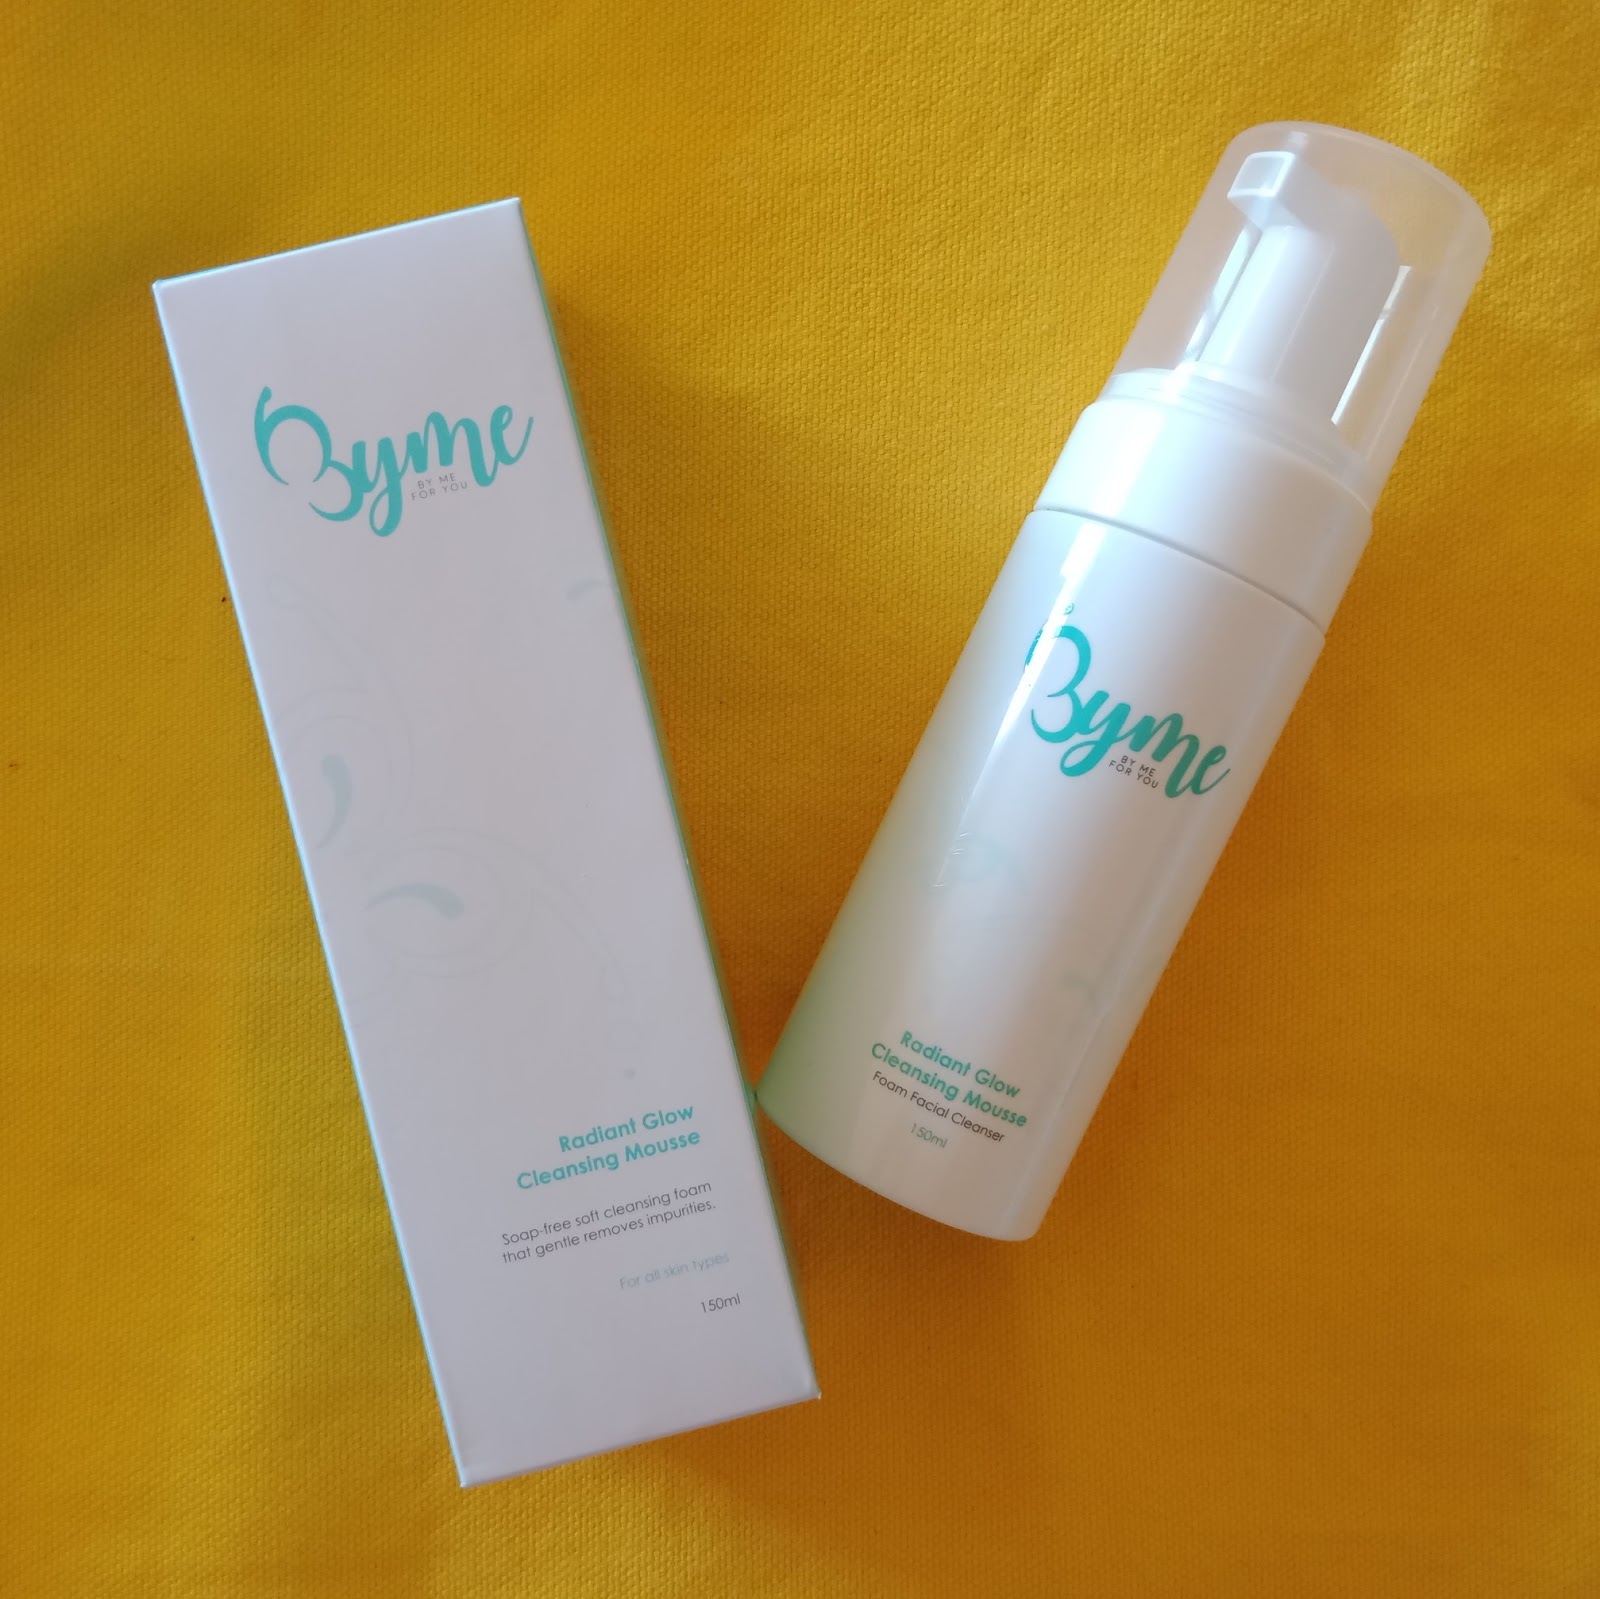 BYME Radiant Glow Cleansing Mousse